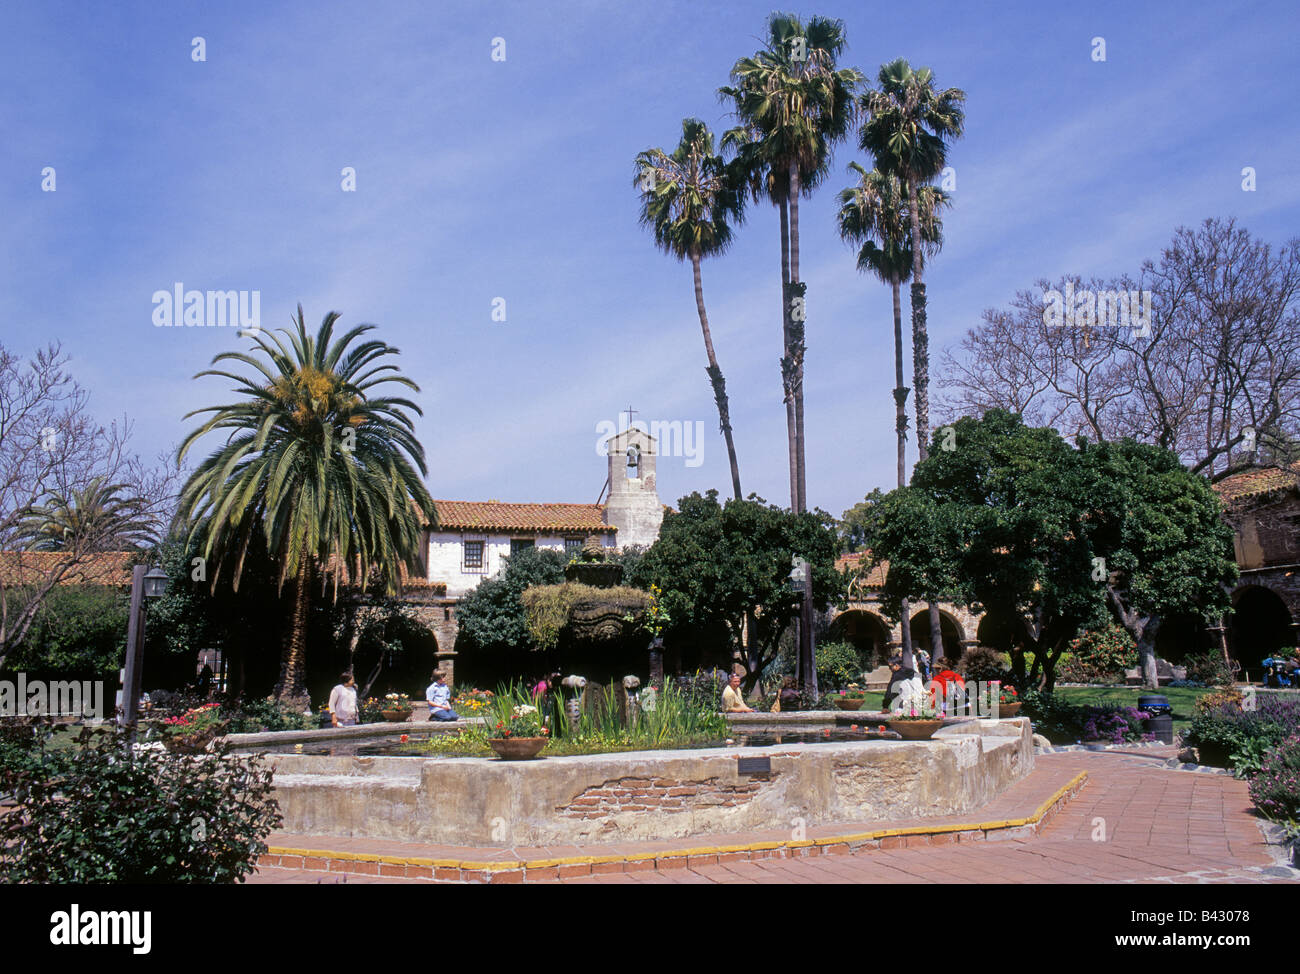 USA CALIFORNIA A view of the grounds of the old Spanish mission of San Juan Capistrano where the swallows return to Stock Photo